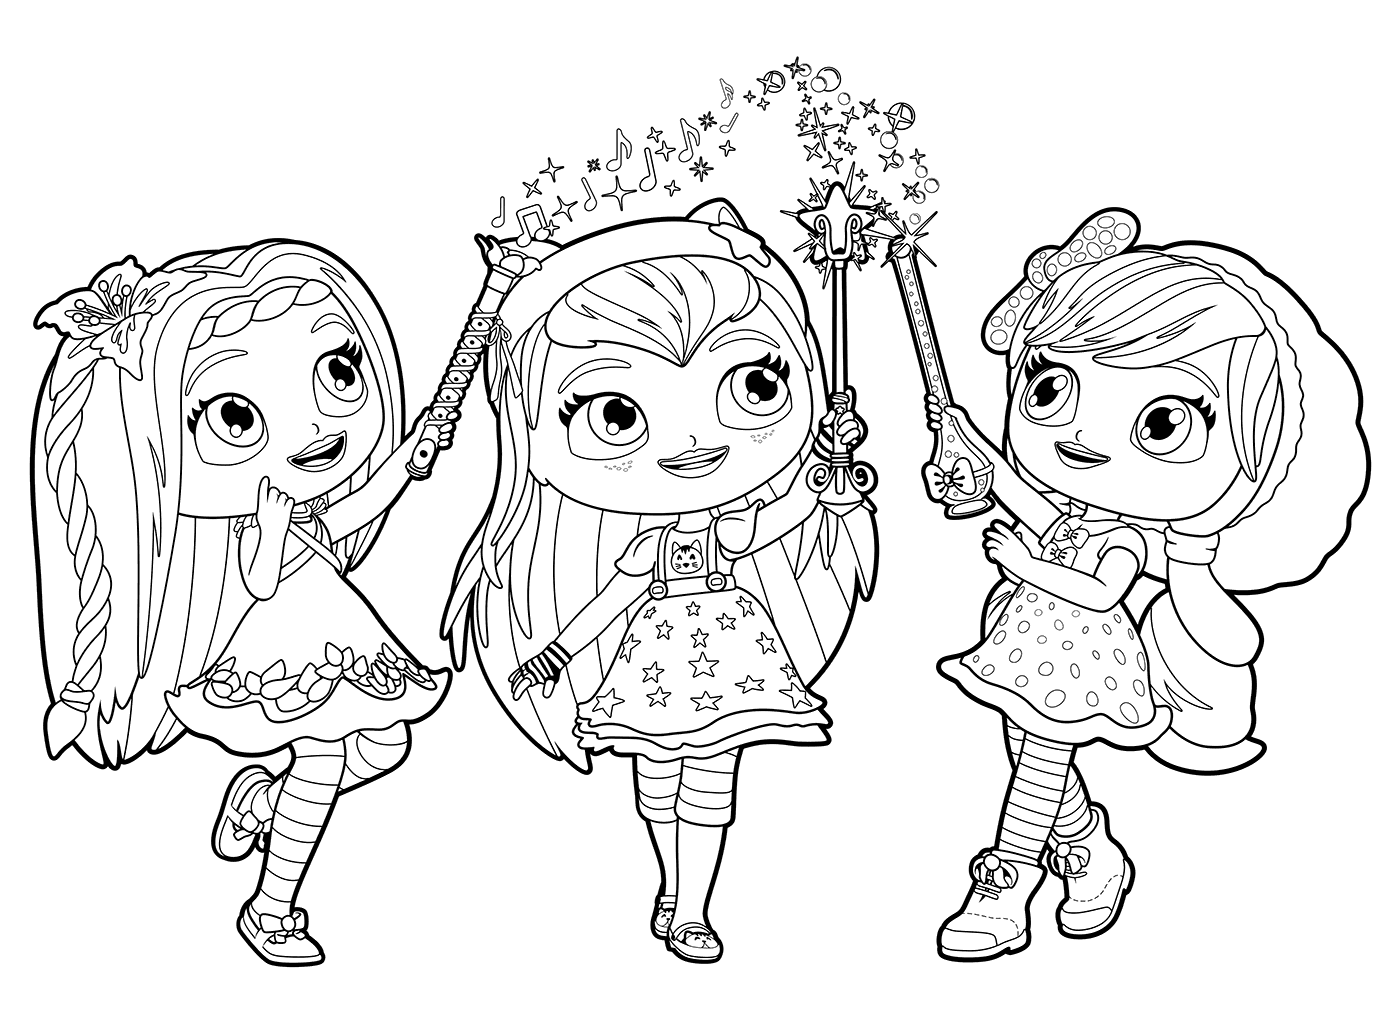 Little Charmers Coloring Pages at GetColorings.com | Free printable ...